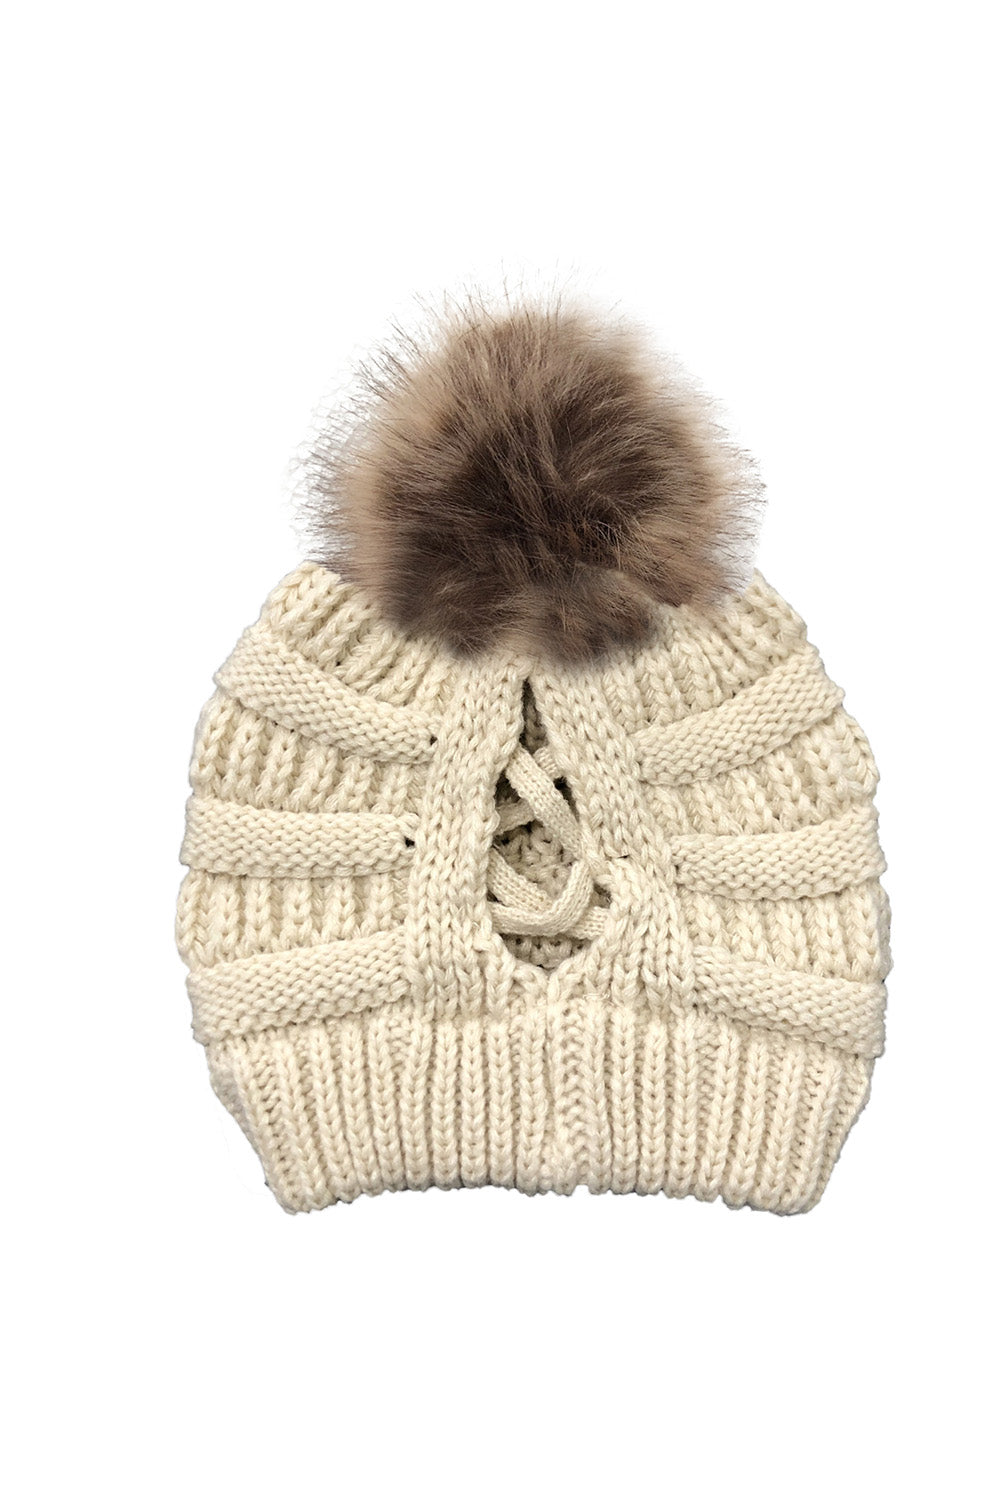 Apricot Outdoor Cable Knit Beanie with Pompom Hats & Caps JT's Designer Fashion